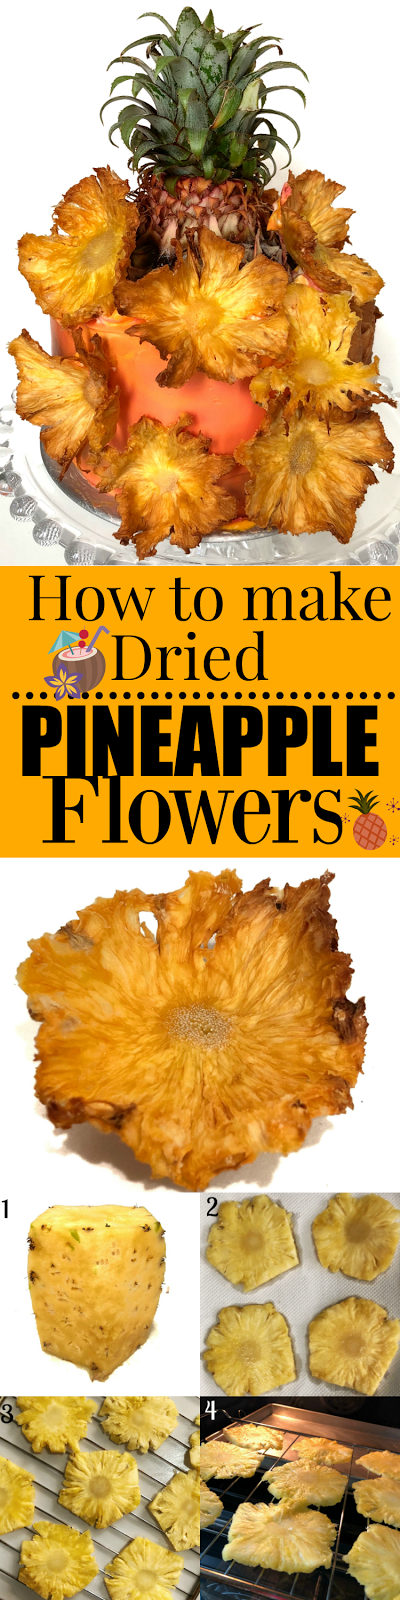 How to make dried pineapple flowers